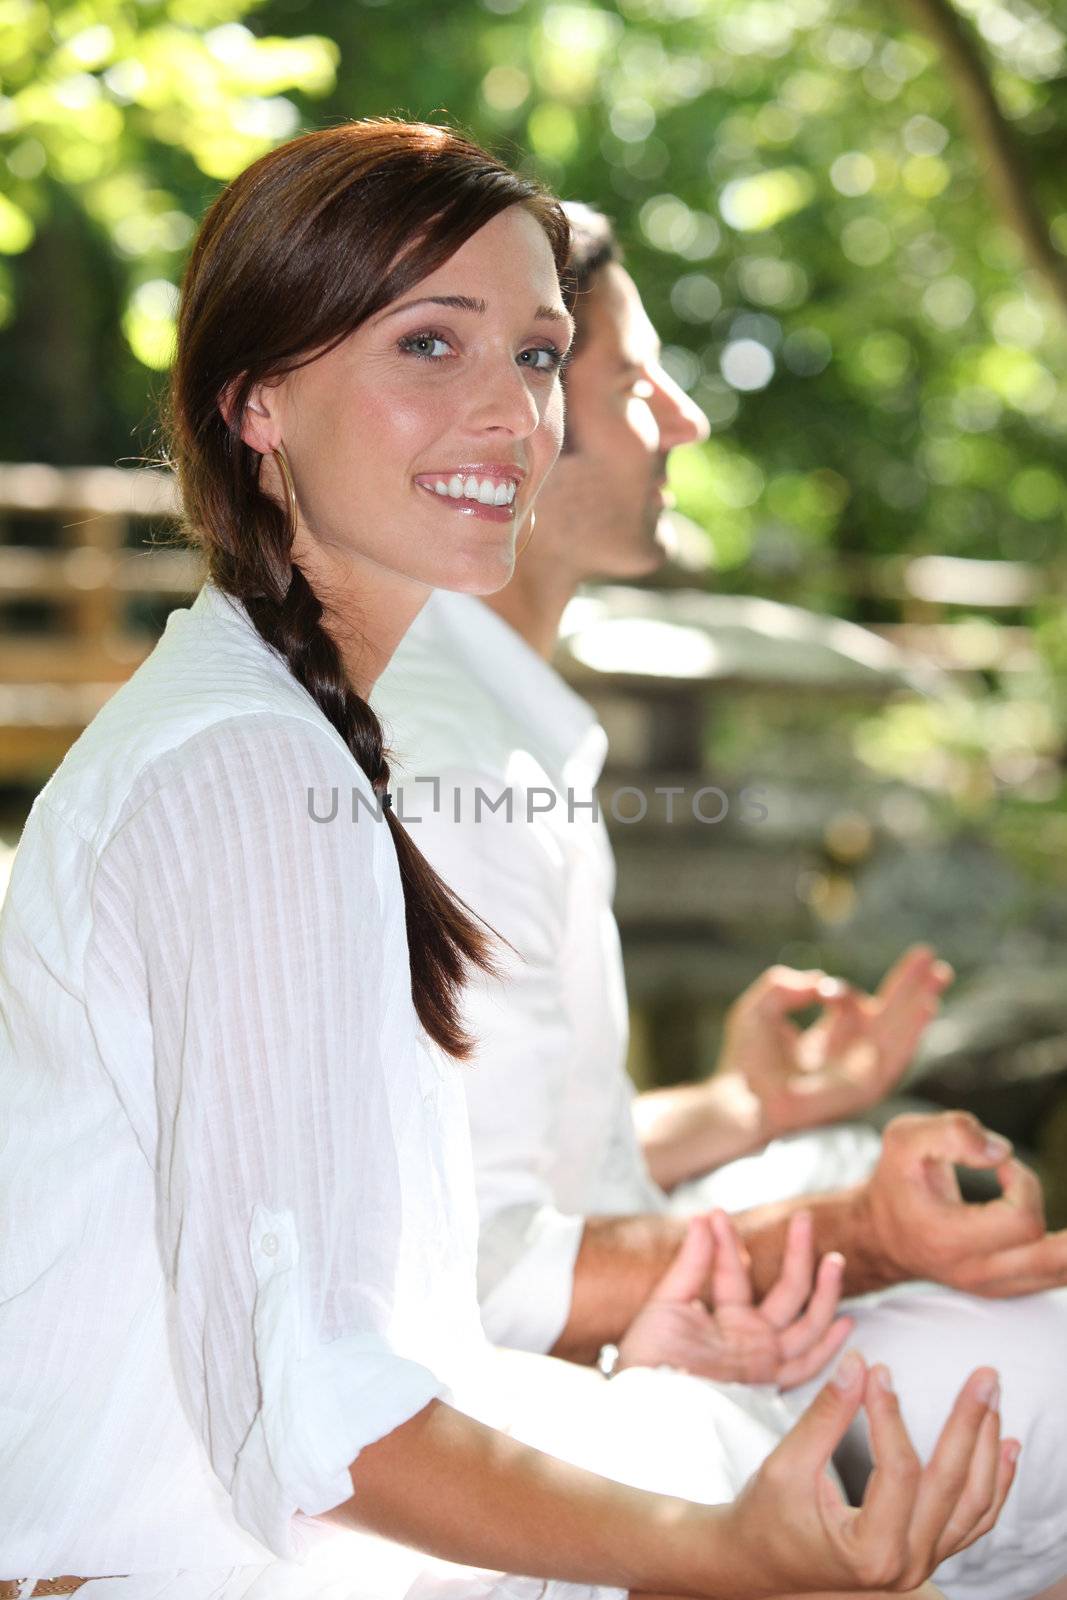 Couple meditating in garden by phovoir